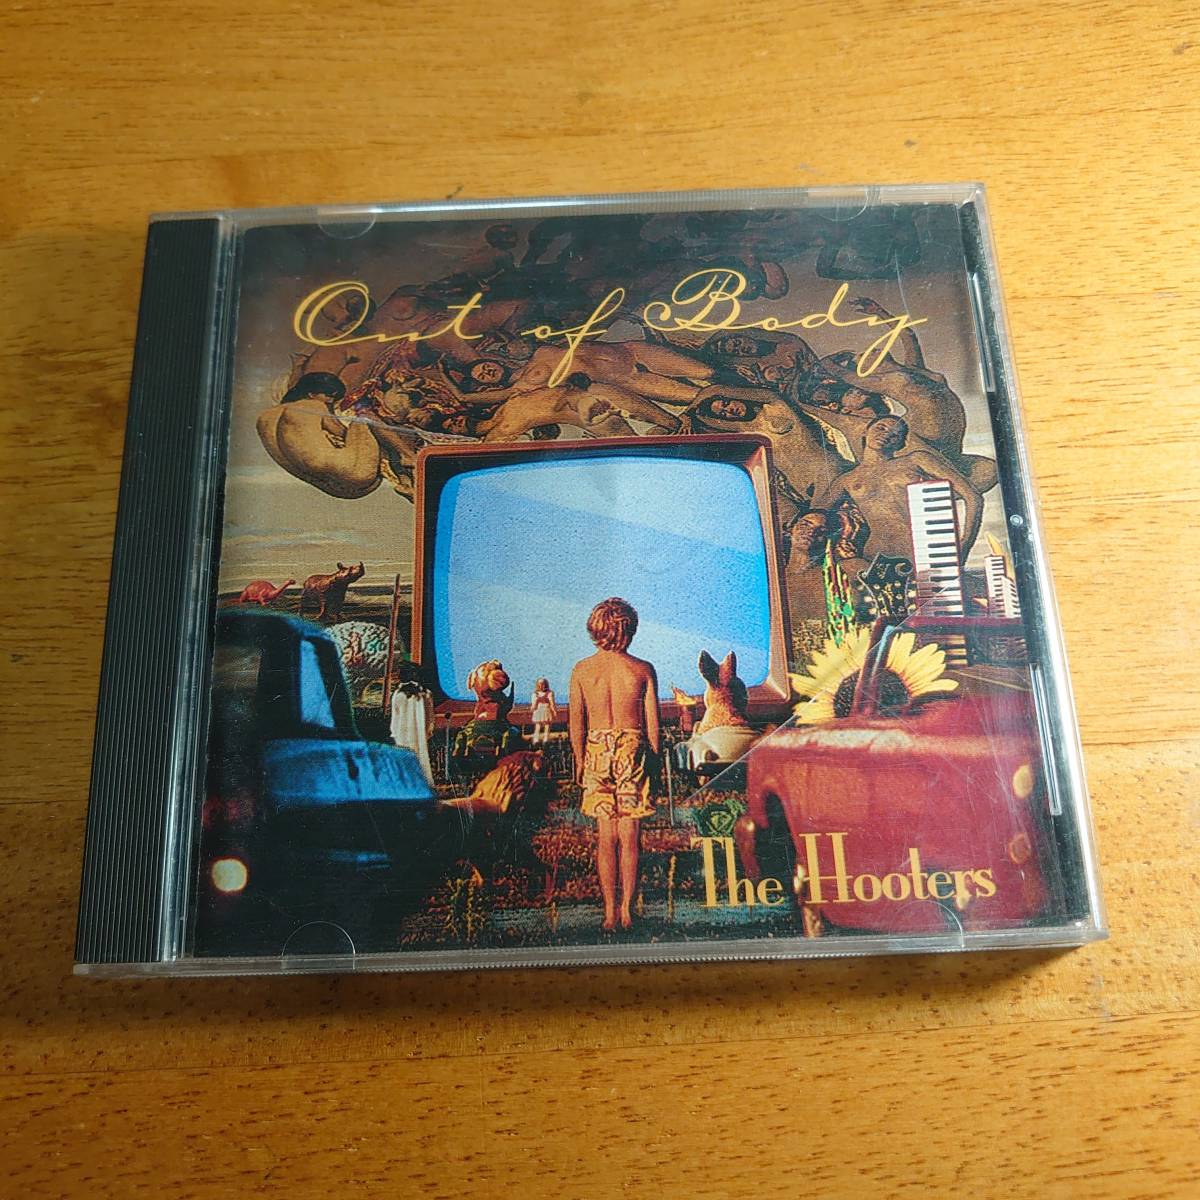 The Hooters / Out of Body フーターズ/アウト・オブ・ボディー 輸入盤 【CD】_画像1